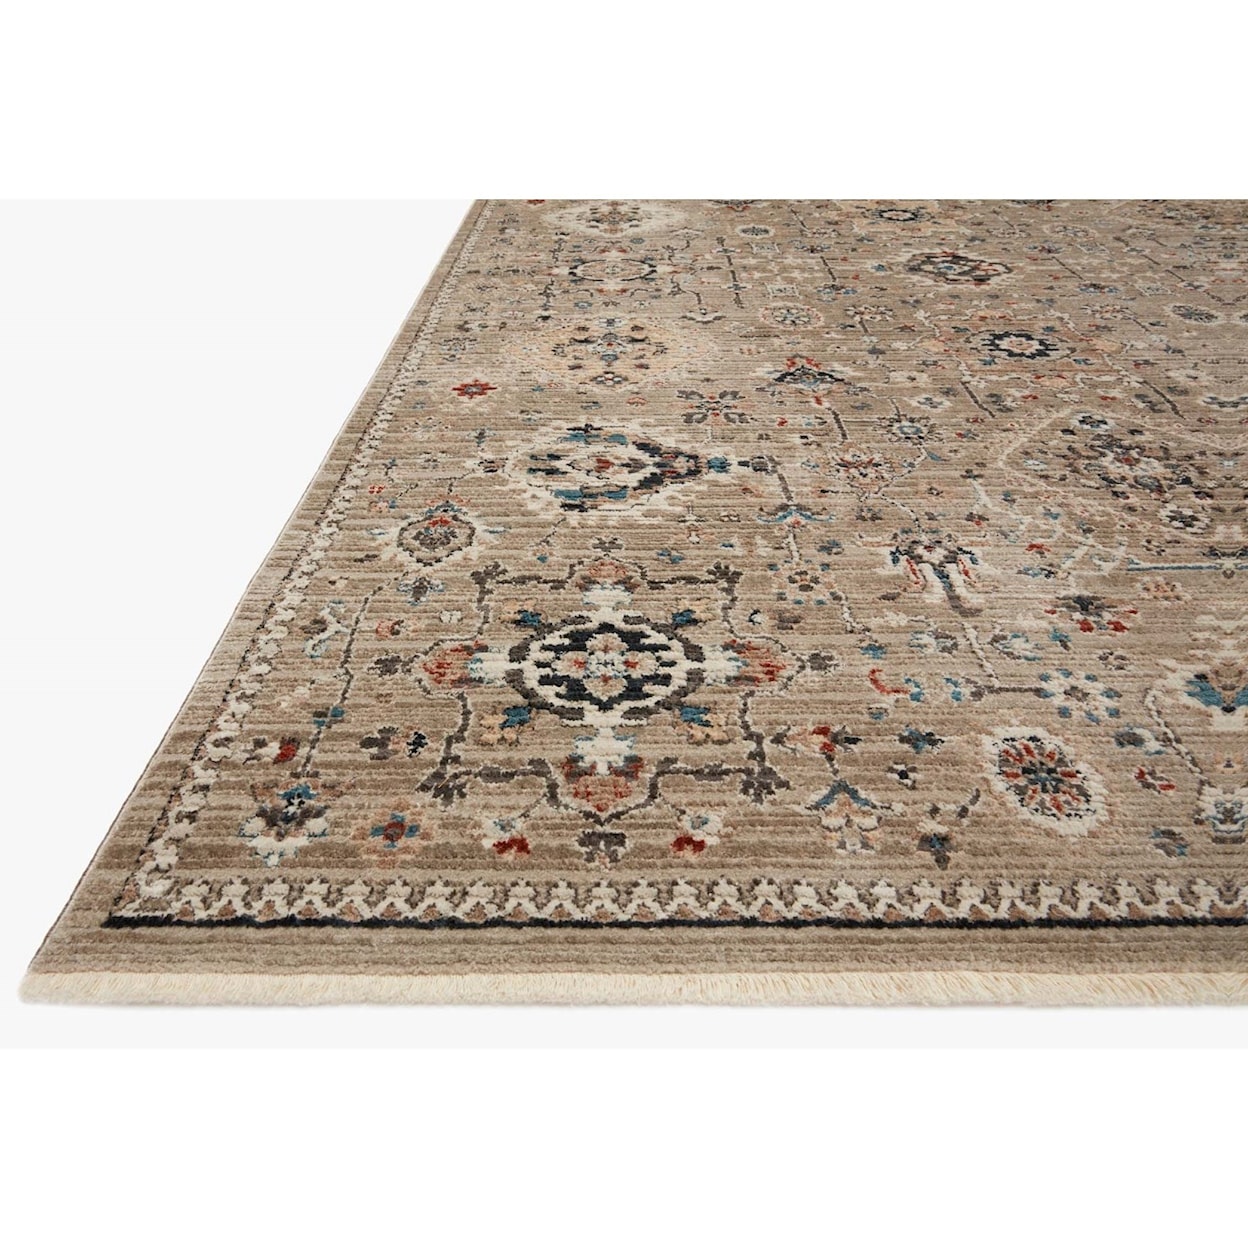 Reeds Rugs Leigh 9'6" x 13' Dove / Multi Rug